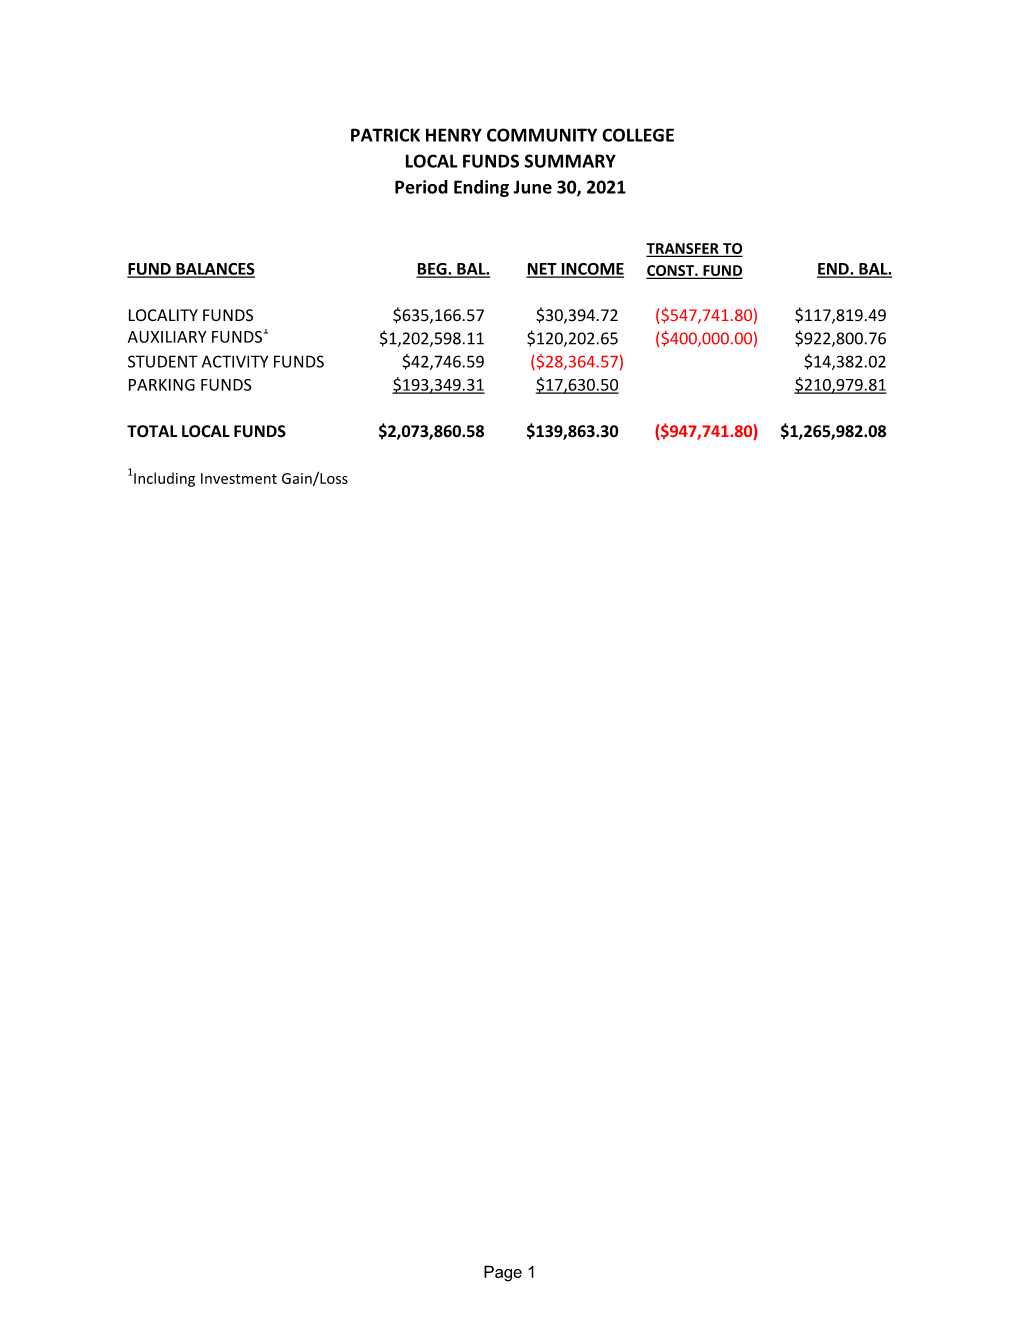 PATRICK HENRY COMMUNITY COLLEGE LOCAL FUNDS SUMMARY Period Ending June 30, 2021